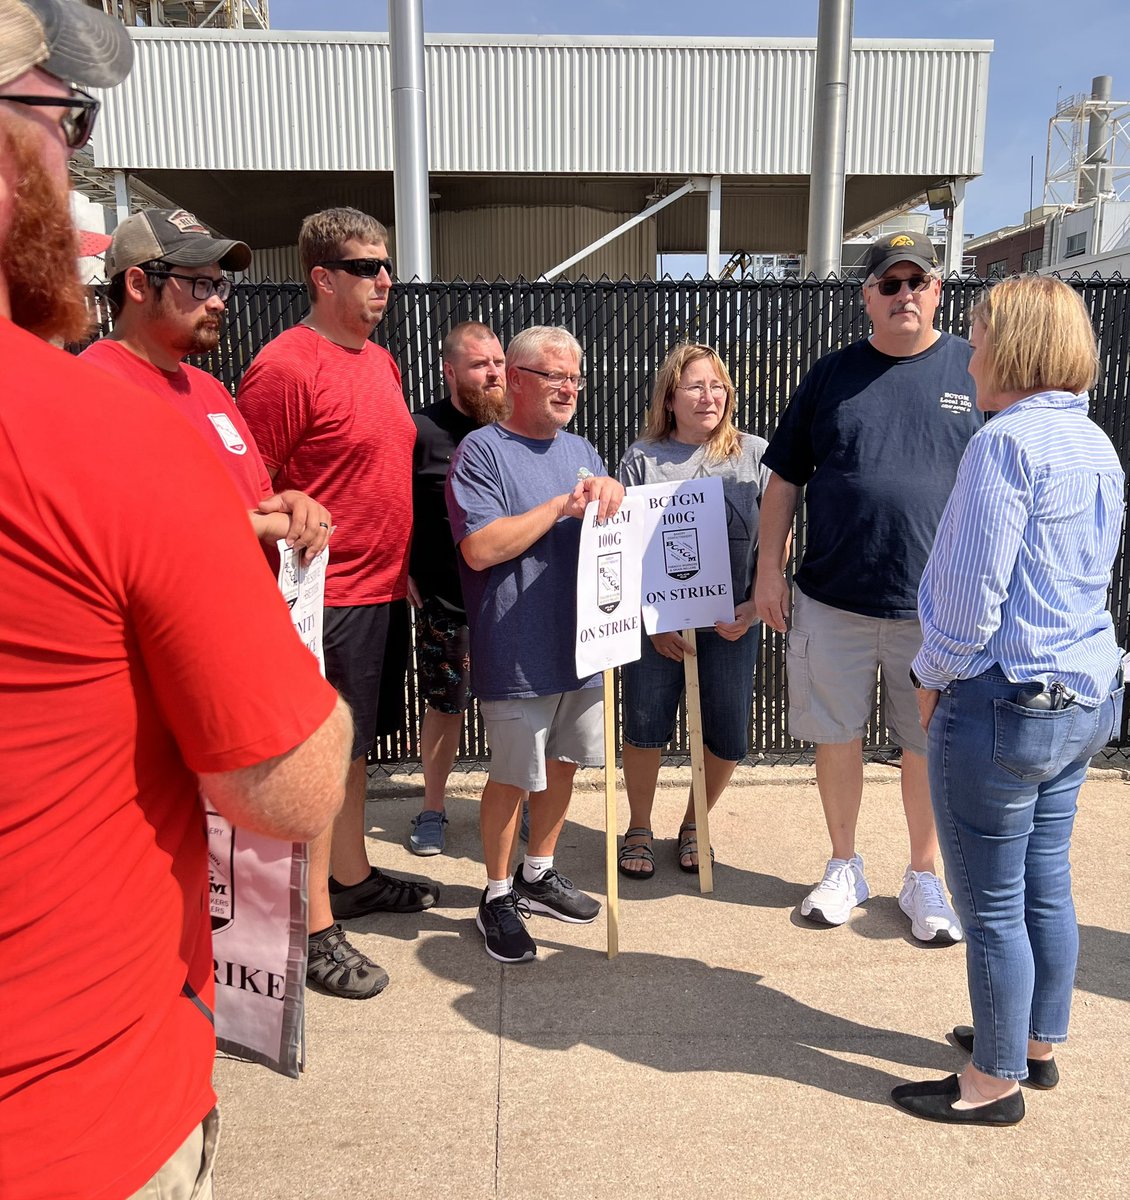 Day 51 of the Ingredion strike and @BCTGM local 100G tells me the company is not bargaining in good faith. Workers are simply asking for a fair process and fair benefits.